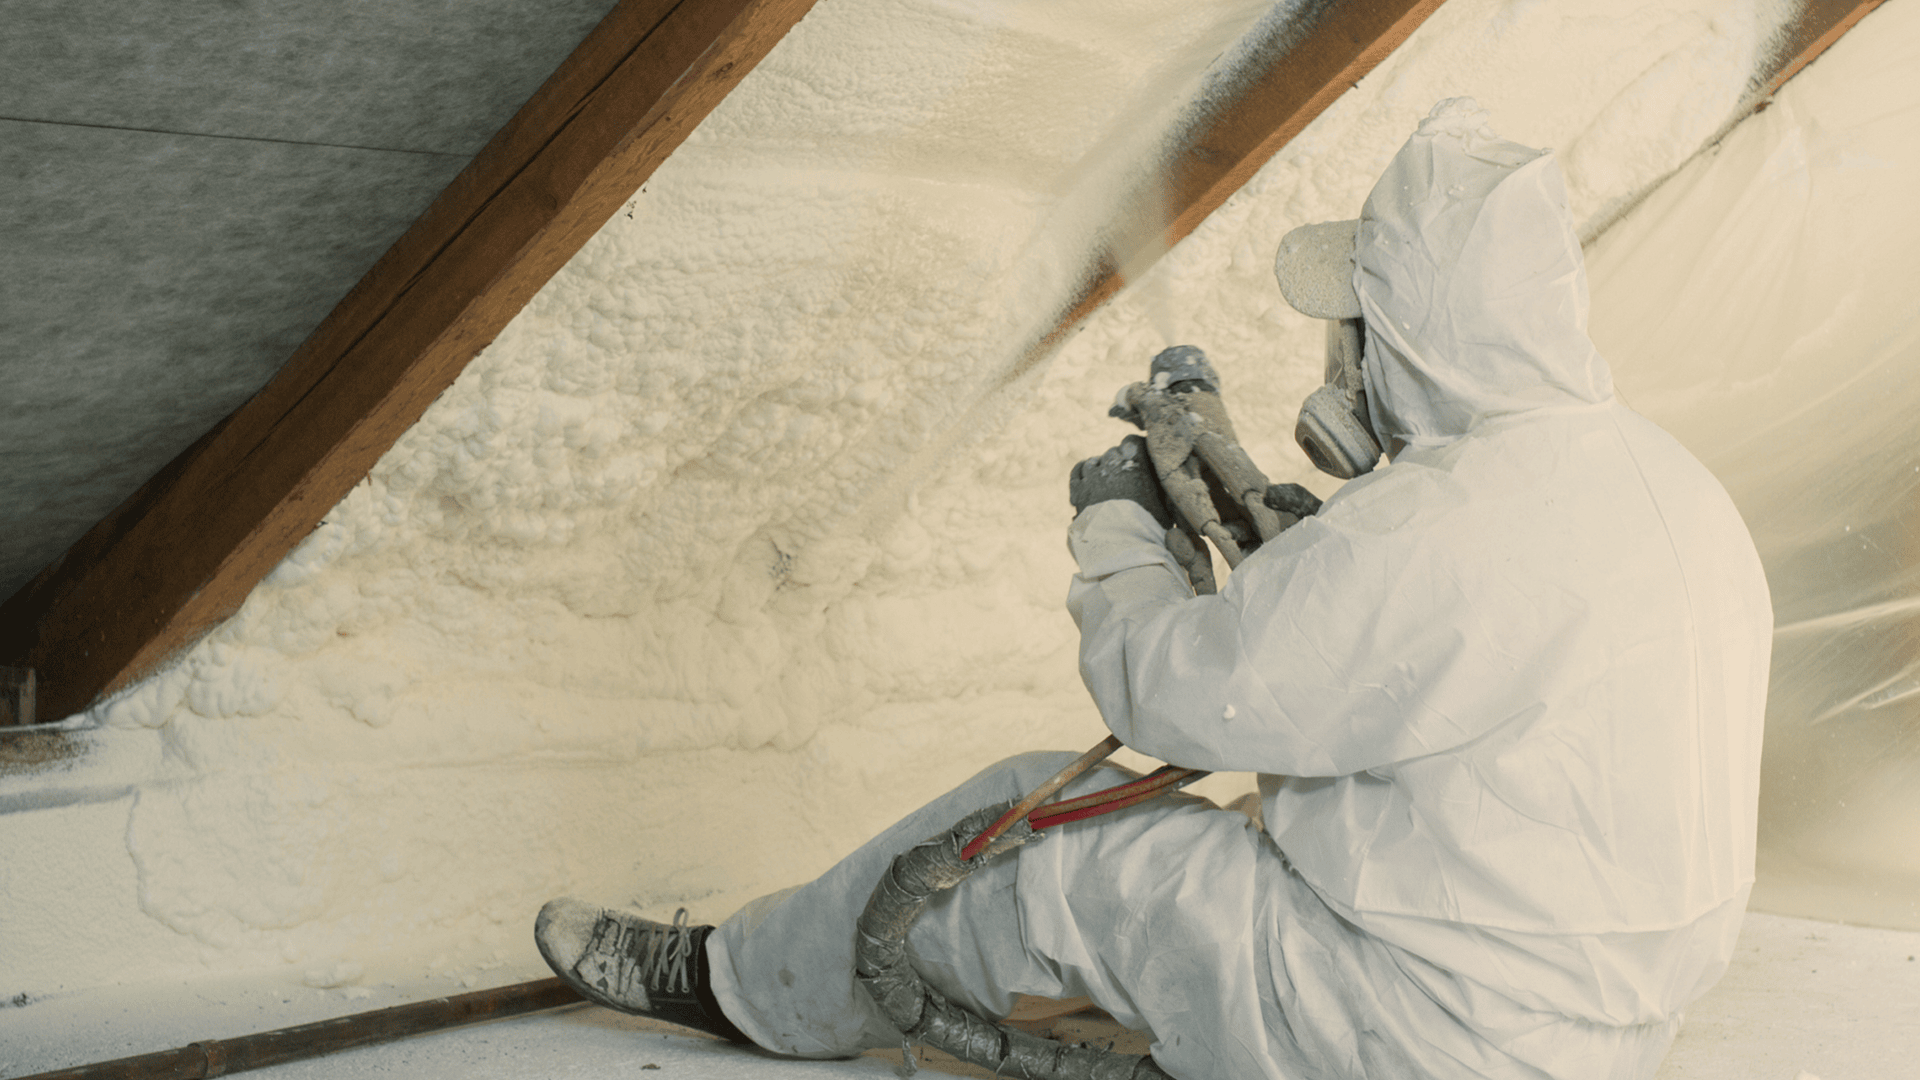 Spray foam being applied to the underside of a roof